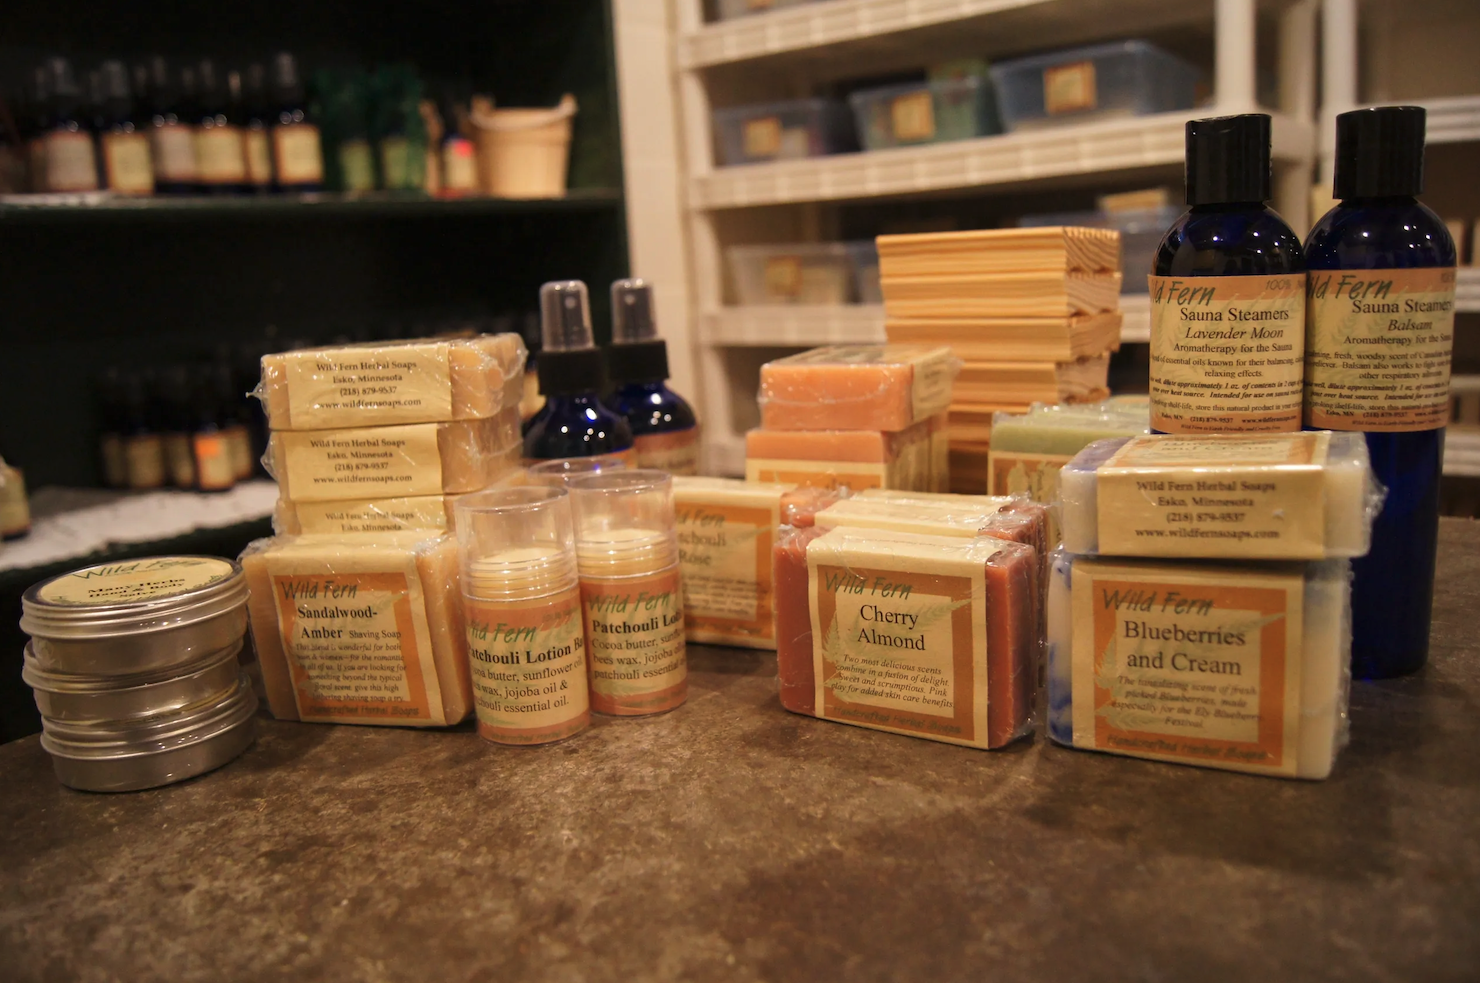 A variety of artisanal soaps, lotions, and skincare products are displayed on a wooden surface. The products include bars of soap labeled with scents like "Blueberries and Cream," "Cherry Almond," and "Amber." In the background, bottles and tins evoke the charm of a cozy coffee shop in Duluth.